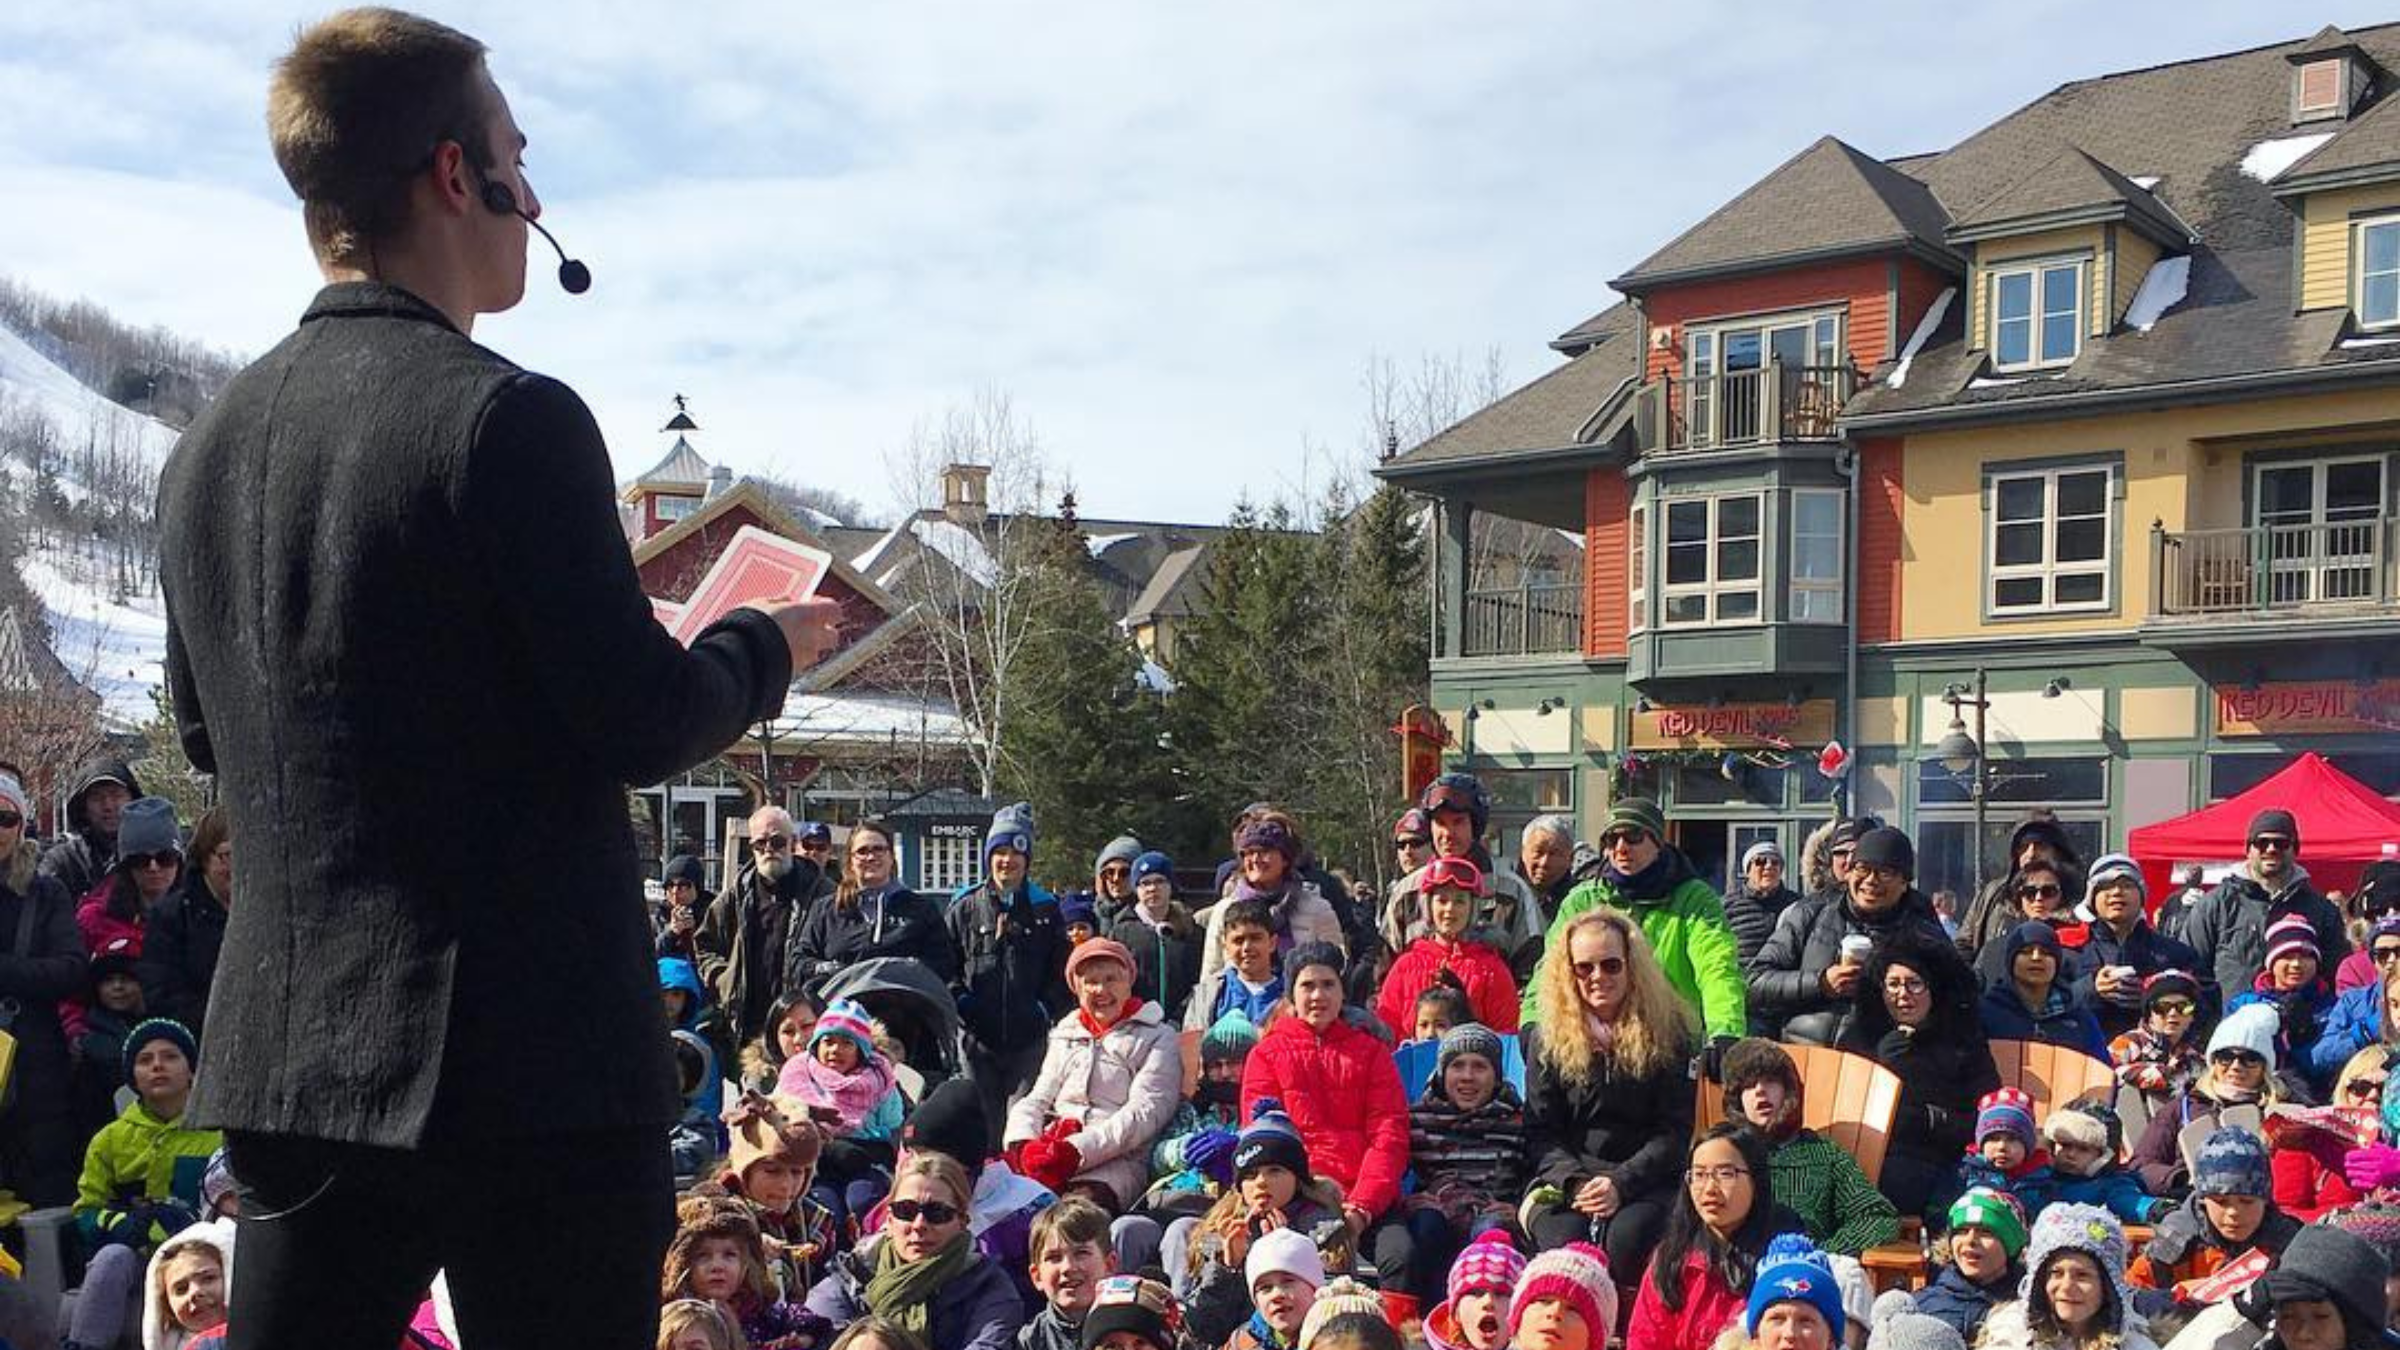 Sayer Bullock Magician at March Break in the village of Blue Mountain